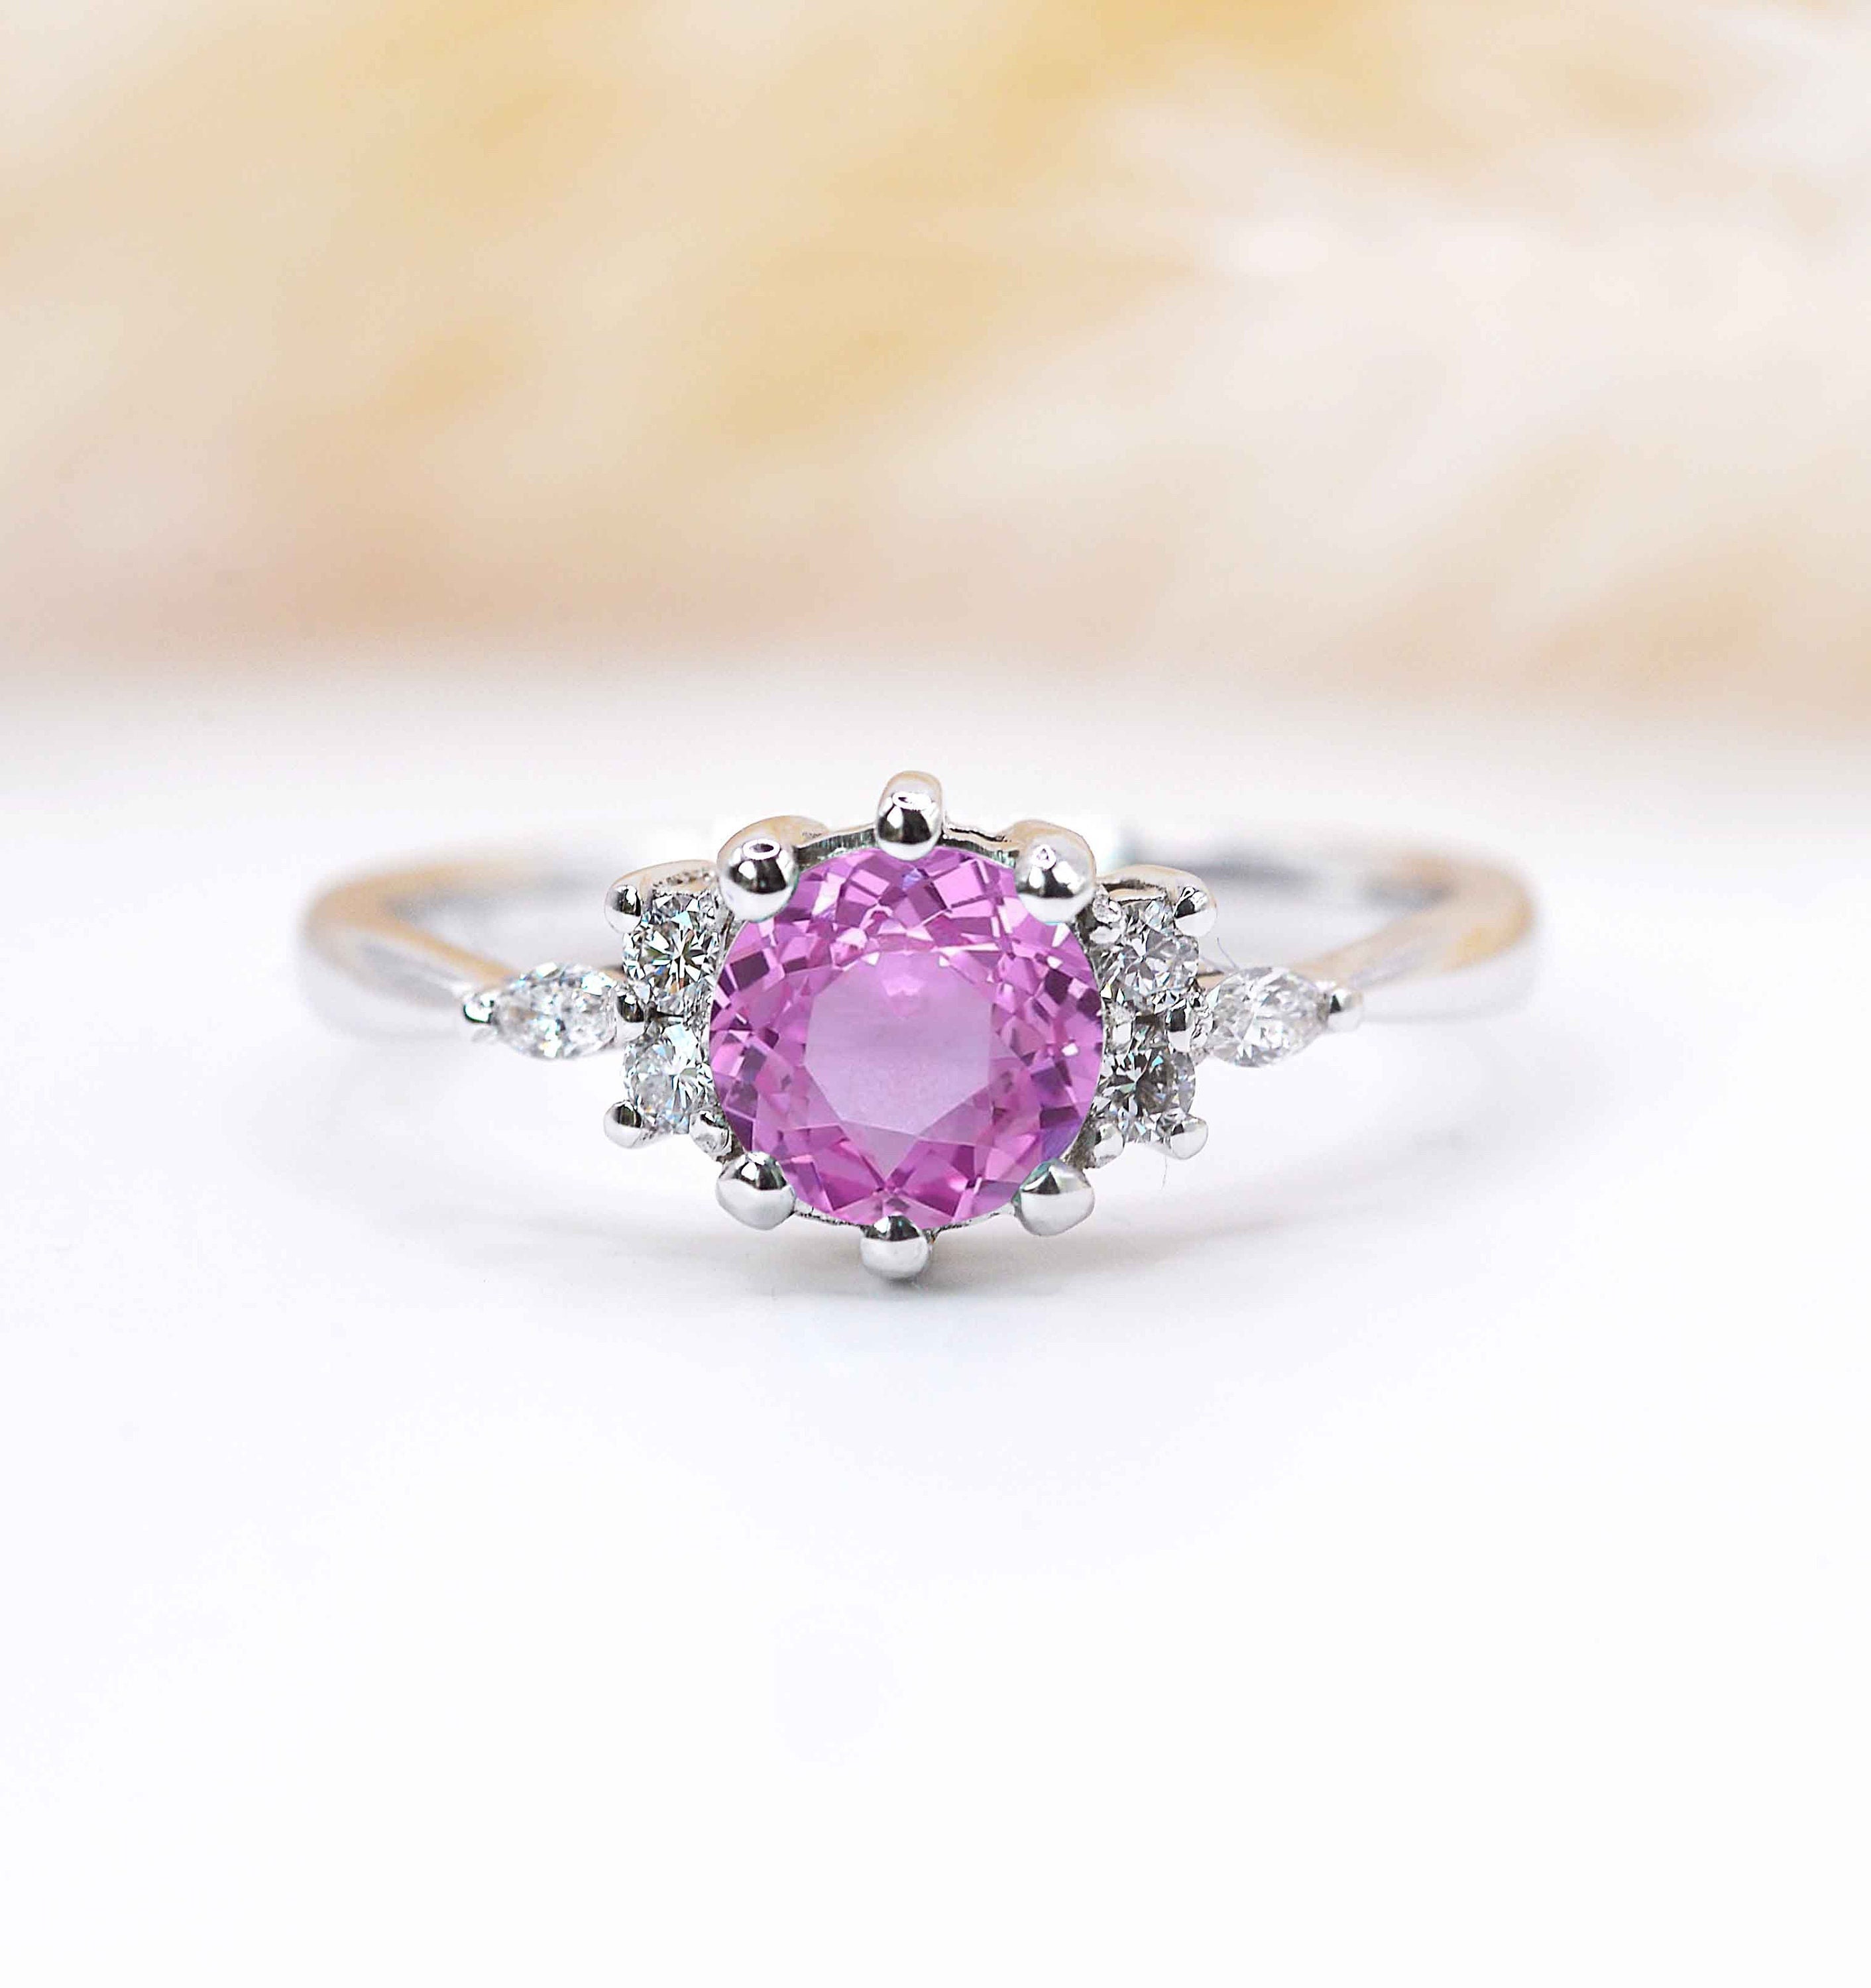 Pink Sapphire White Gold Engagement Ring | Delicate Pink & Diamond Celebrity Vintage Art Deco Stylish